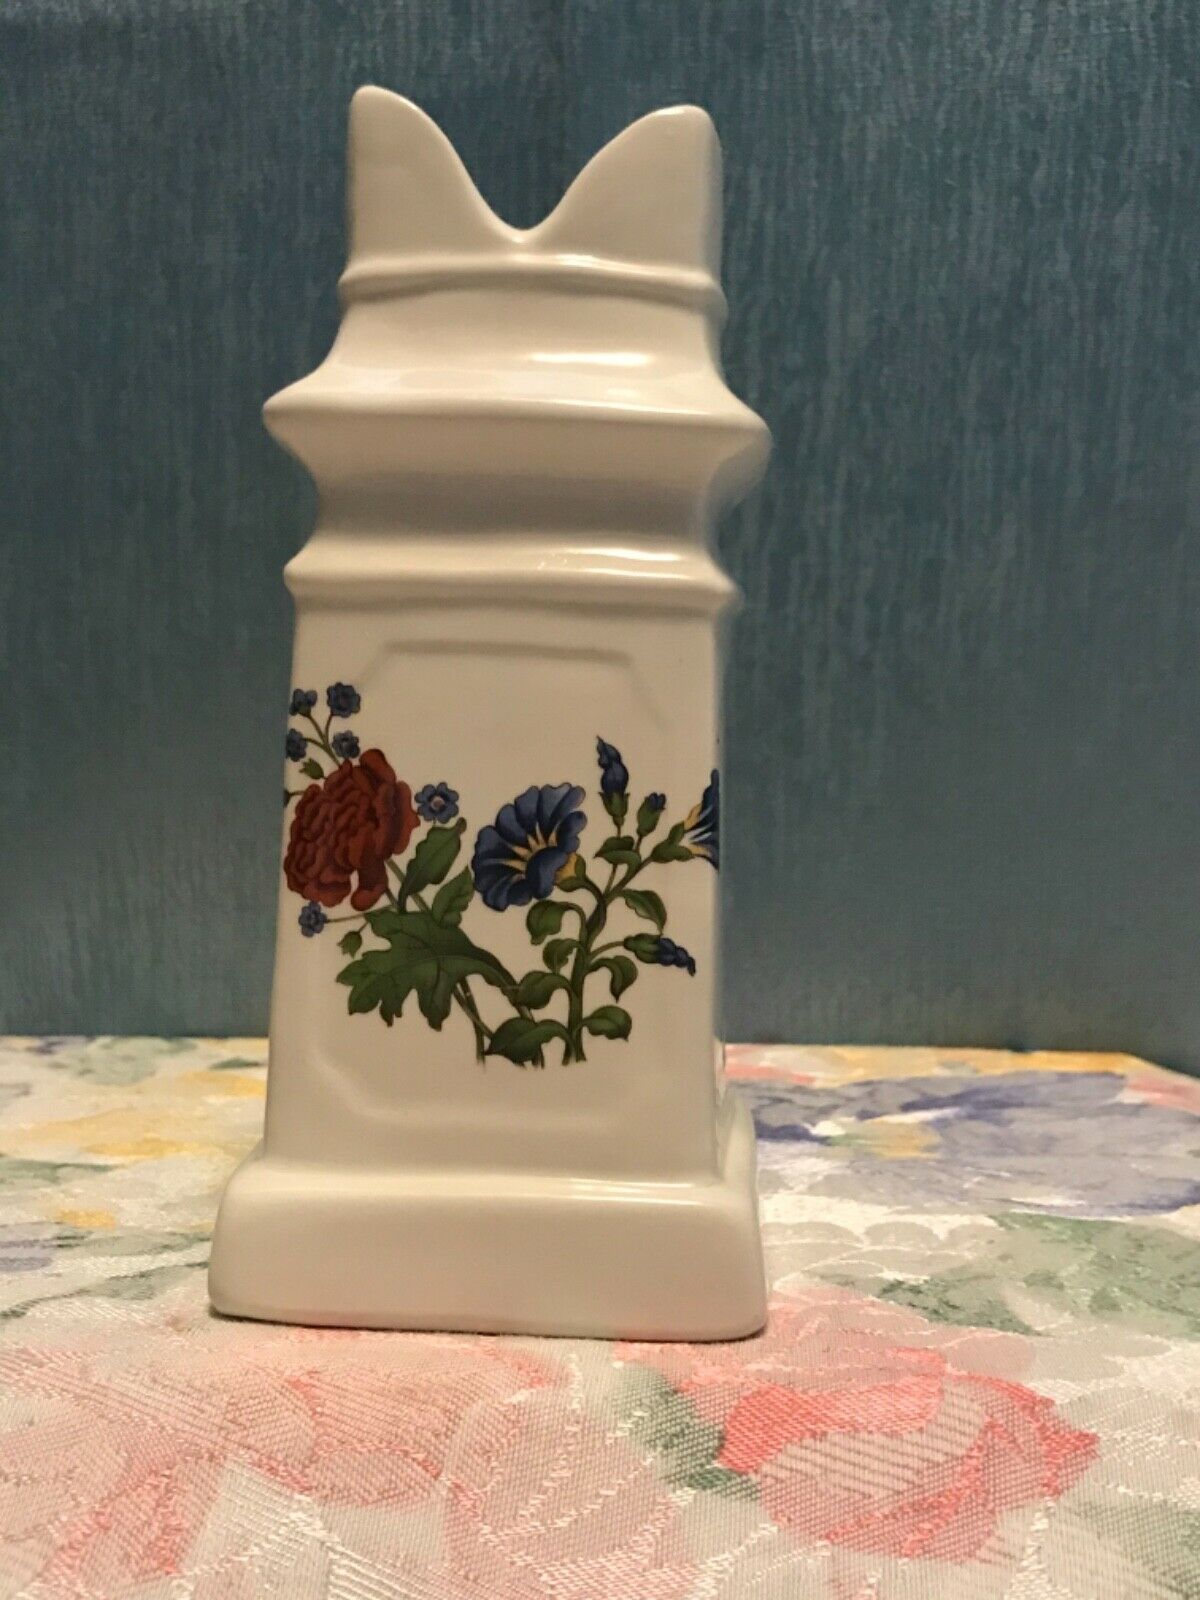 Burleigh Reproduction Staffordshire Chimney Pot Square Spiked